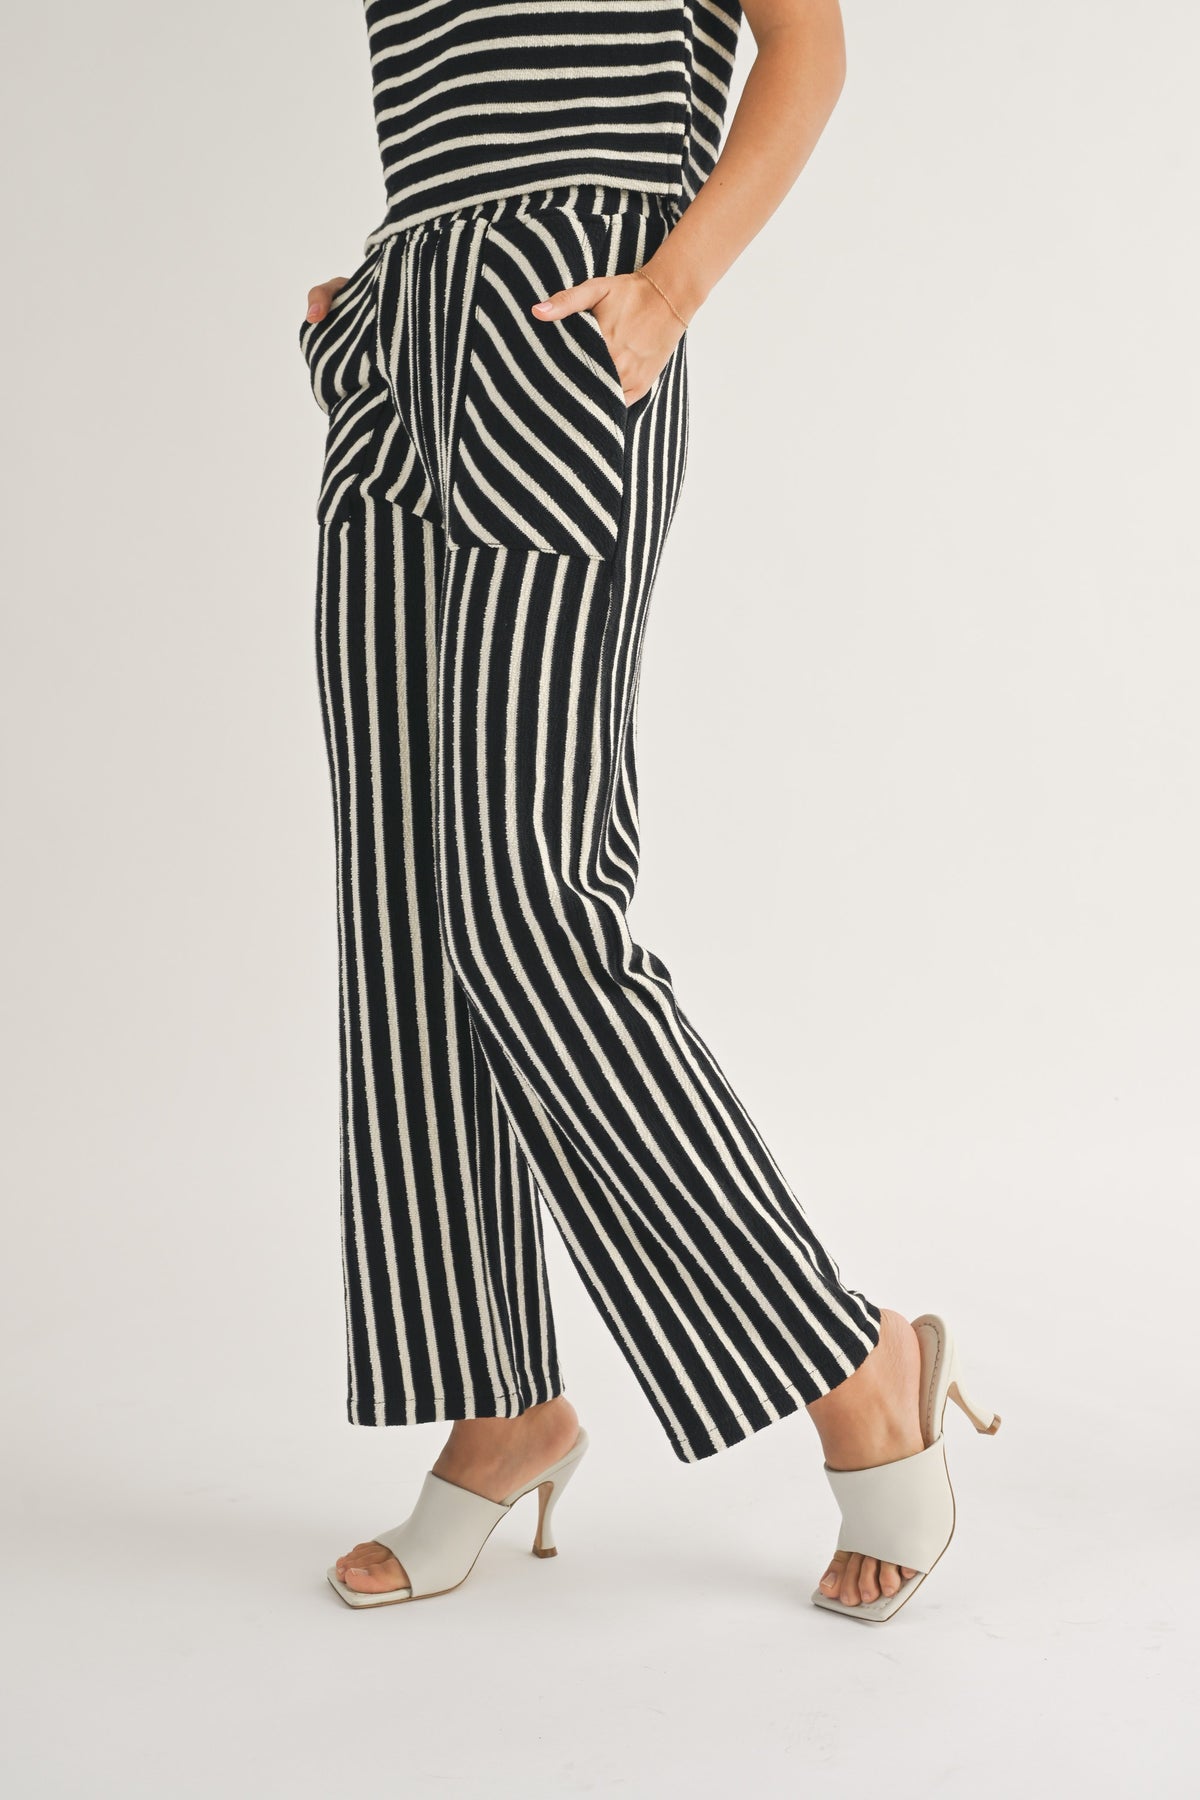 textured stripe knitted pants in black and white-side